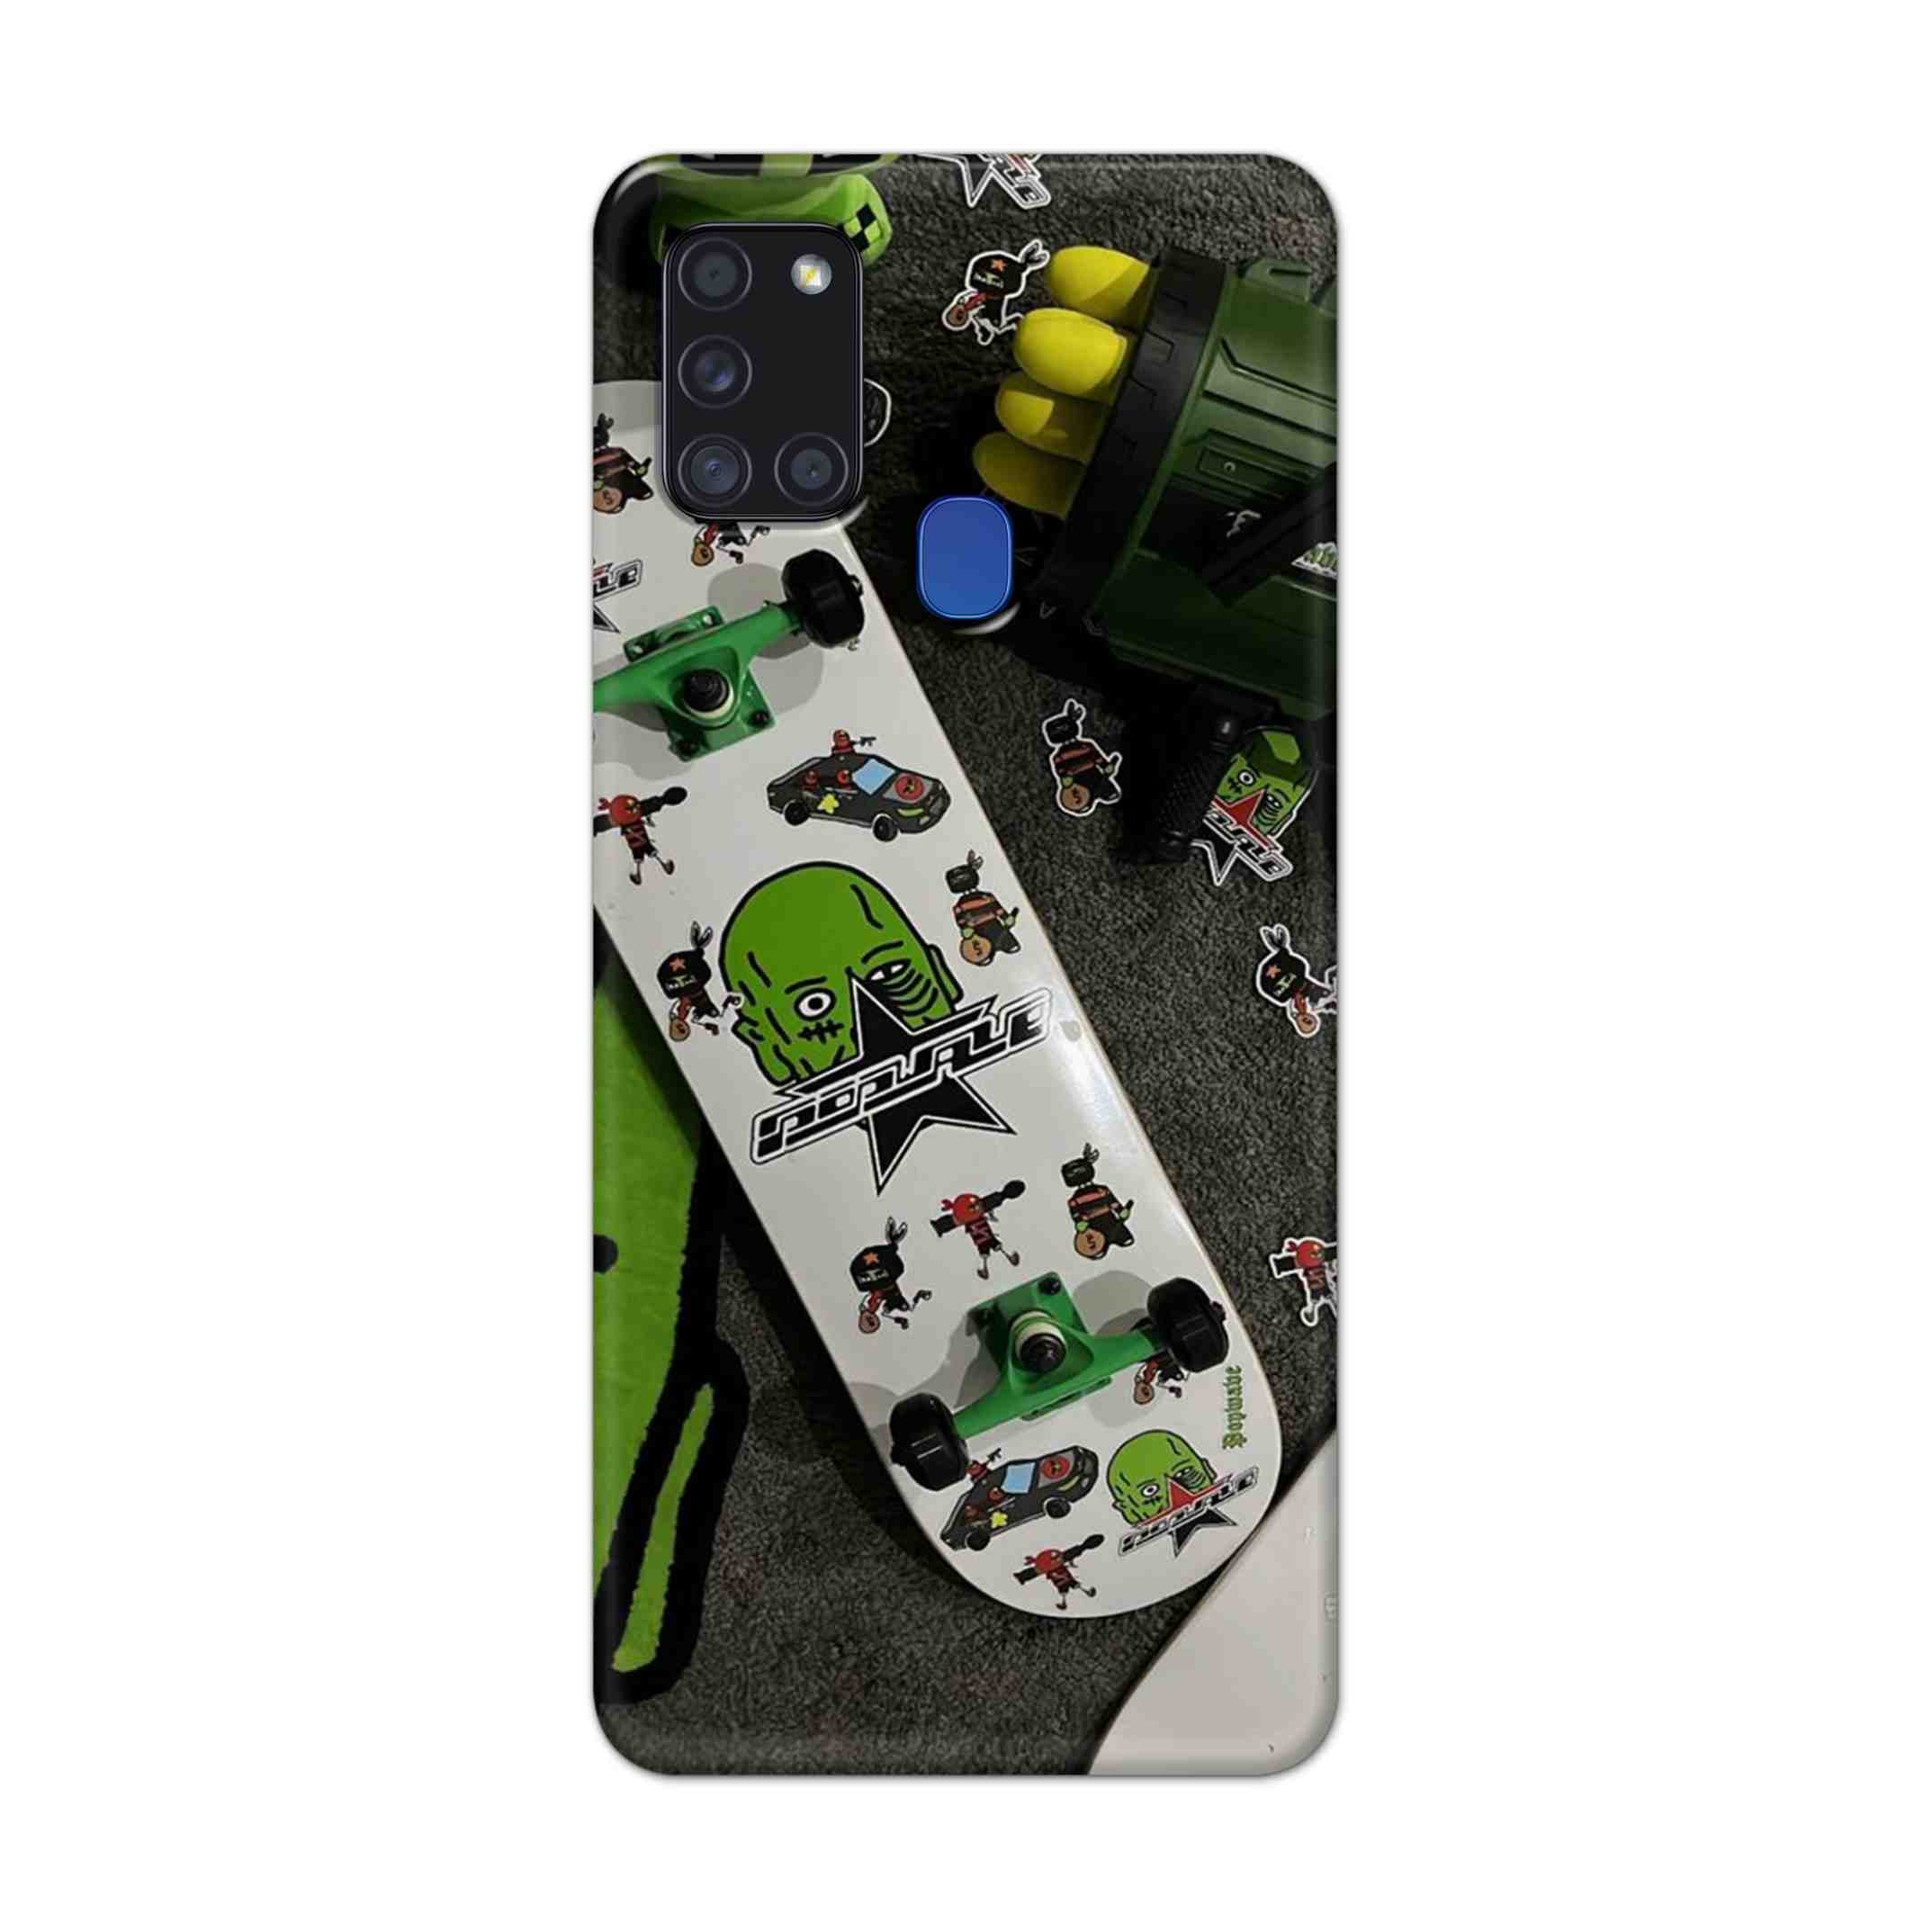 Buy Hulk Skateboard Hard Back Mobile Phone Case Cover For Samsung Galaxy A21s Online